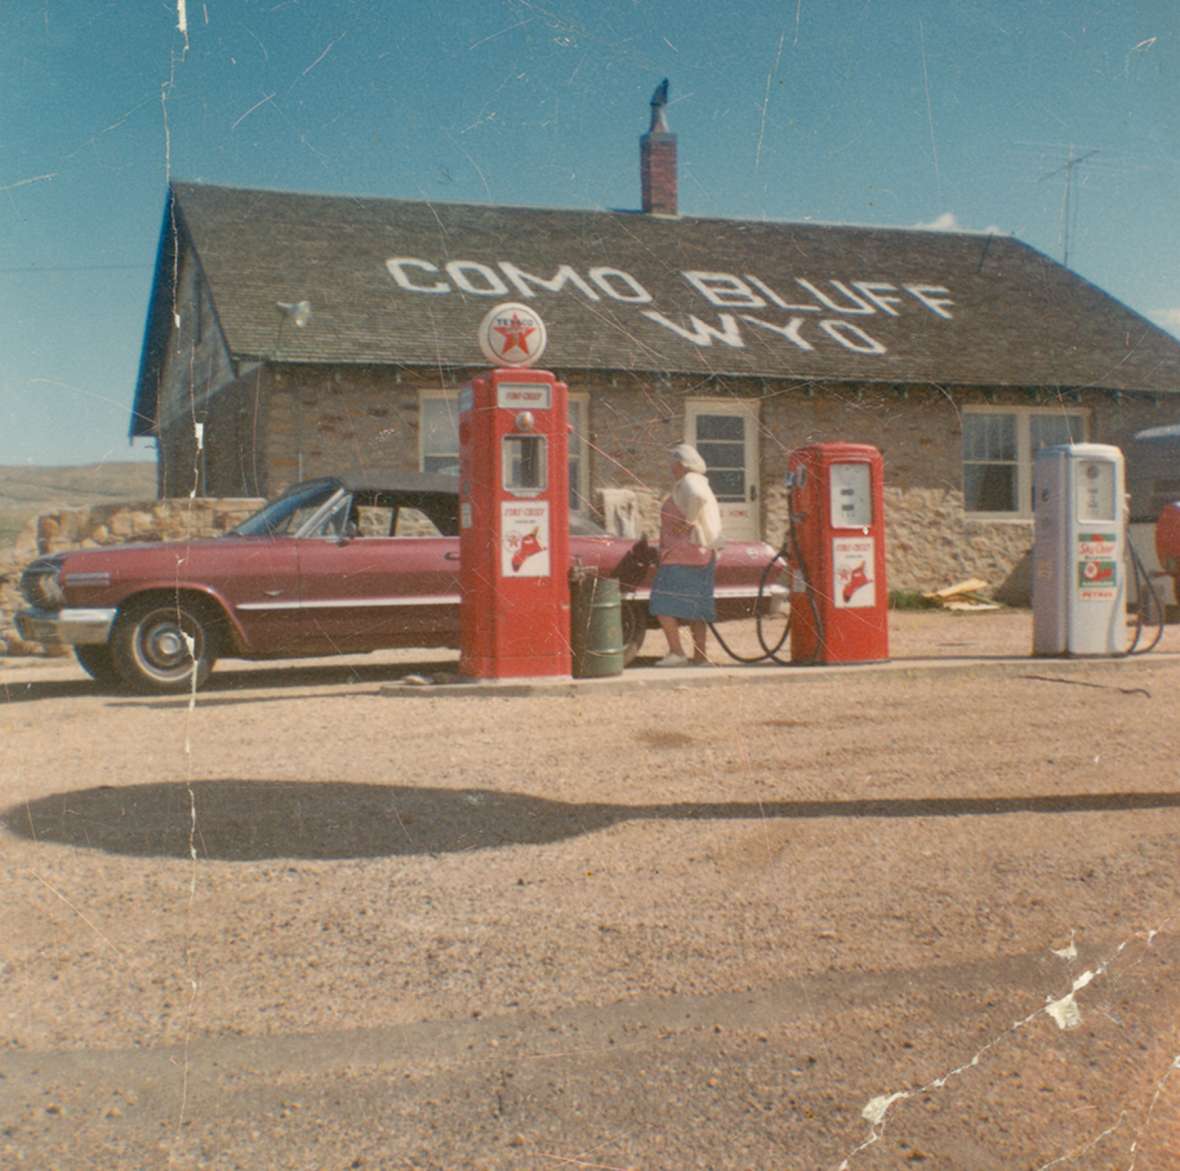 At Como Bluff east of Medicine Bow, the Boylan family in the 1930s built the famed 'fossil cabin' out of pieces of dinosaur bone and other fossils, together with this more conventional house. The roadside attraction and Texaco station continued operating into the 1970s—but after 1970, when Interstate 80 was completed, business would have contracted severely. Wyoming State Archives.